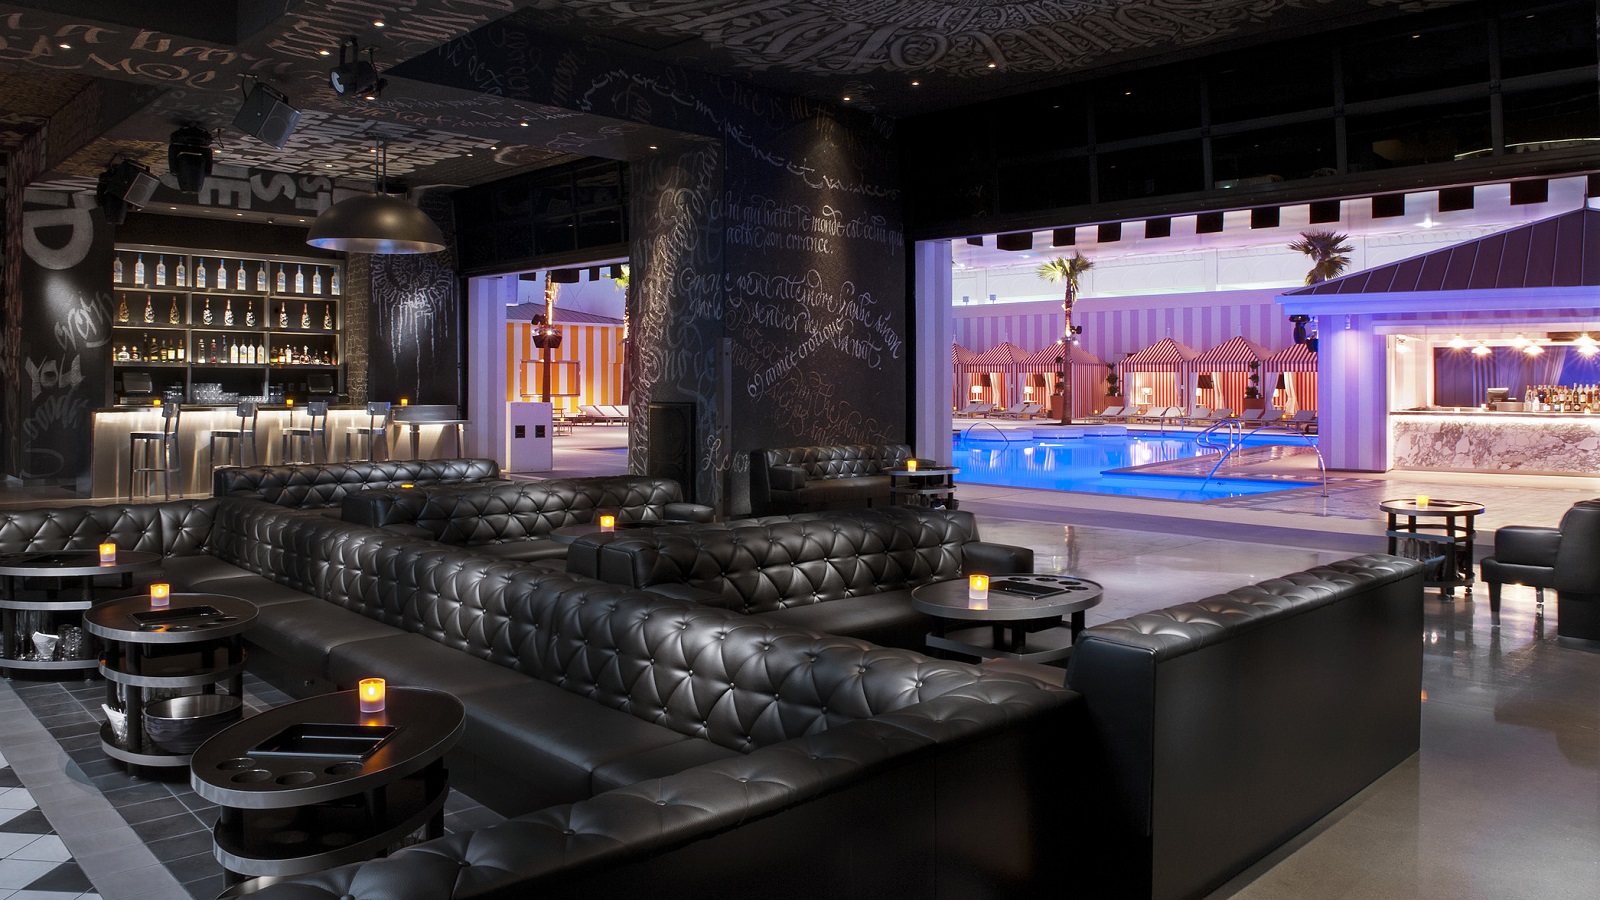 The former SLS Las Vegas has been completely transformed into the W Las Vegas a 289-room tower located on the North End of t